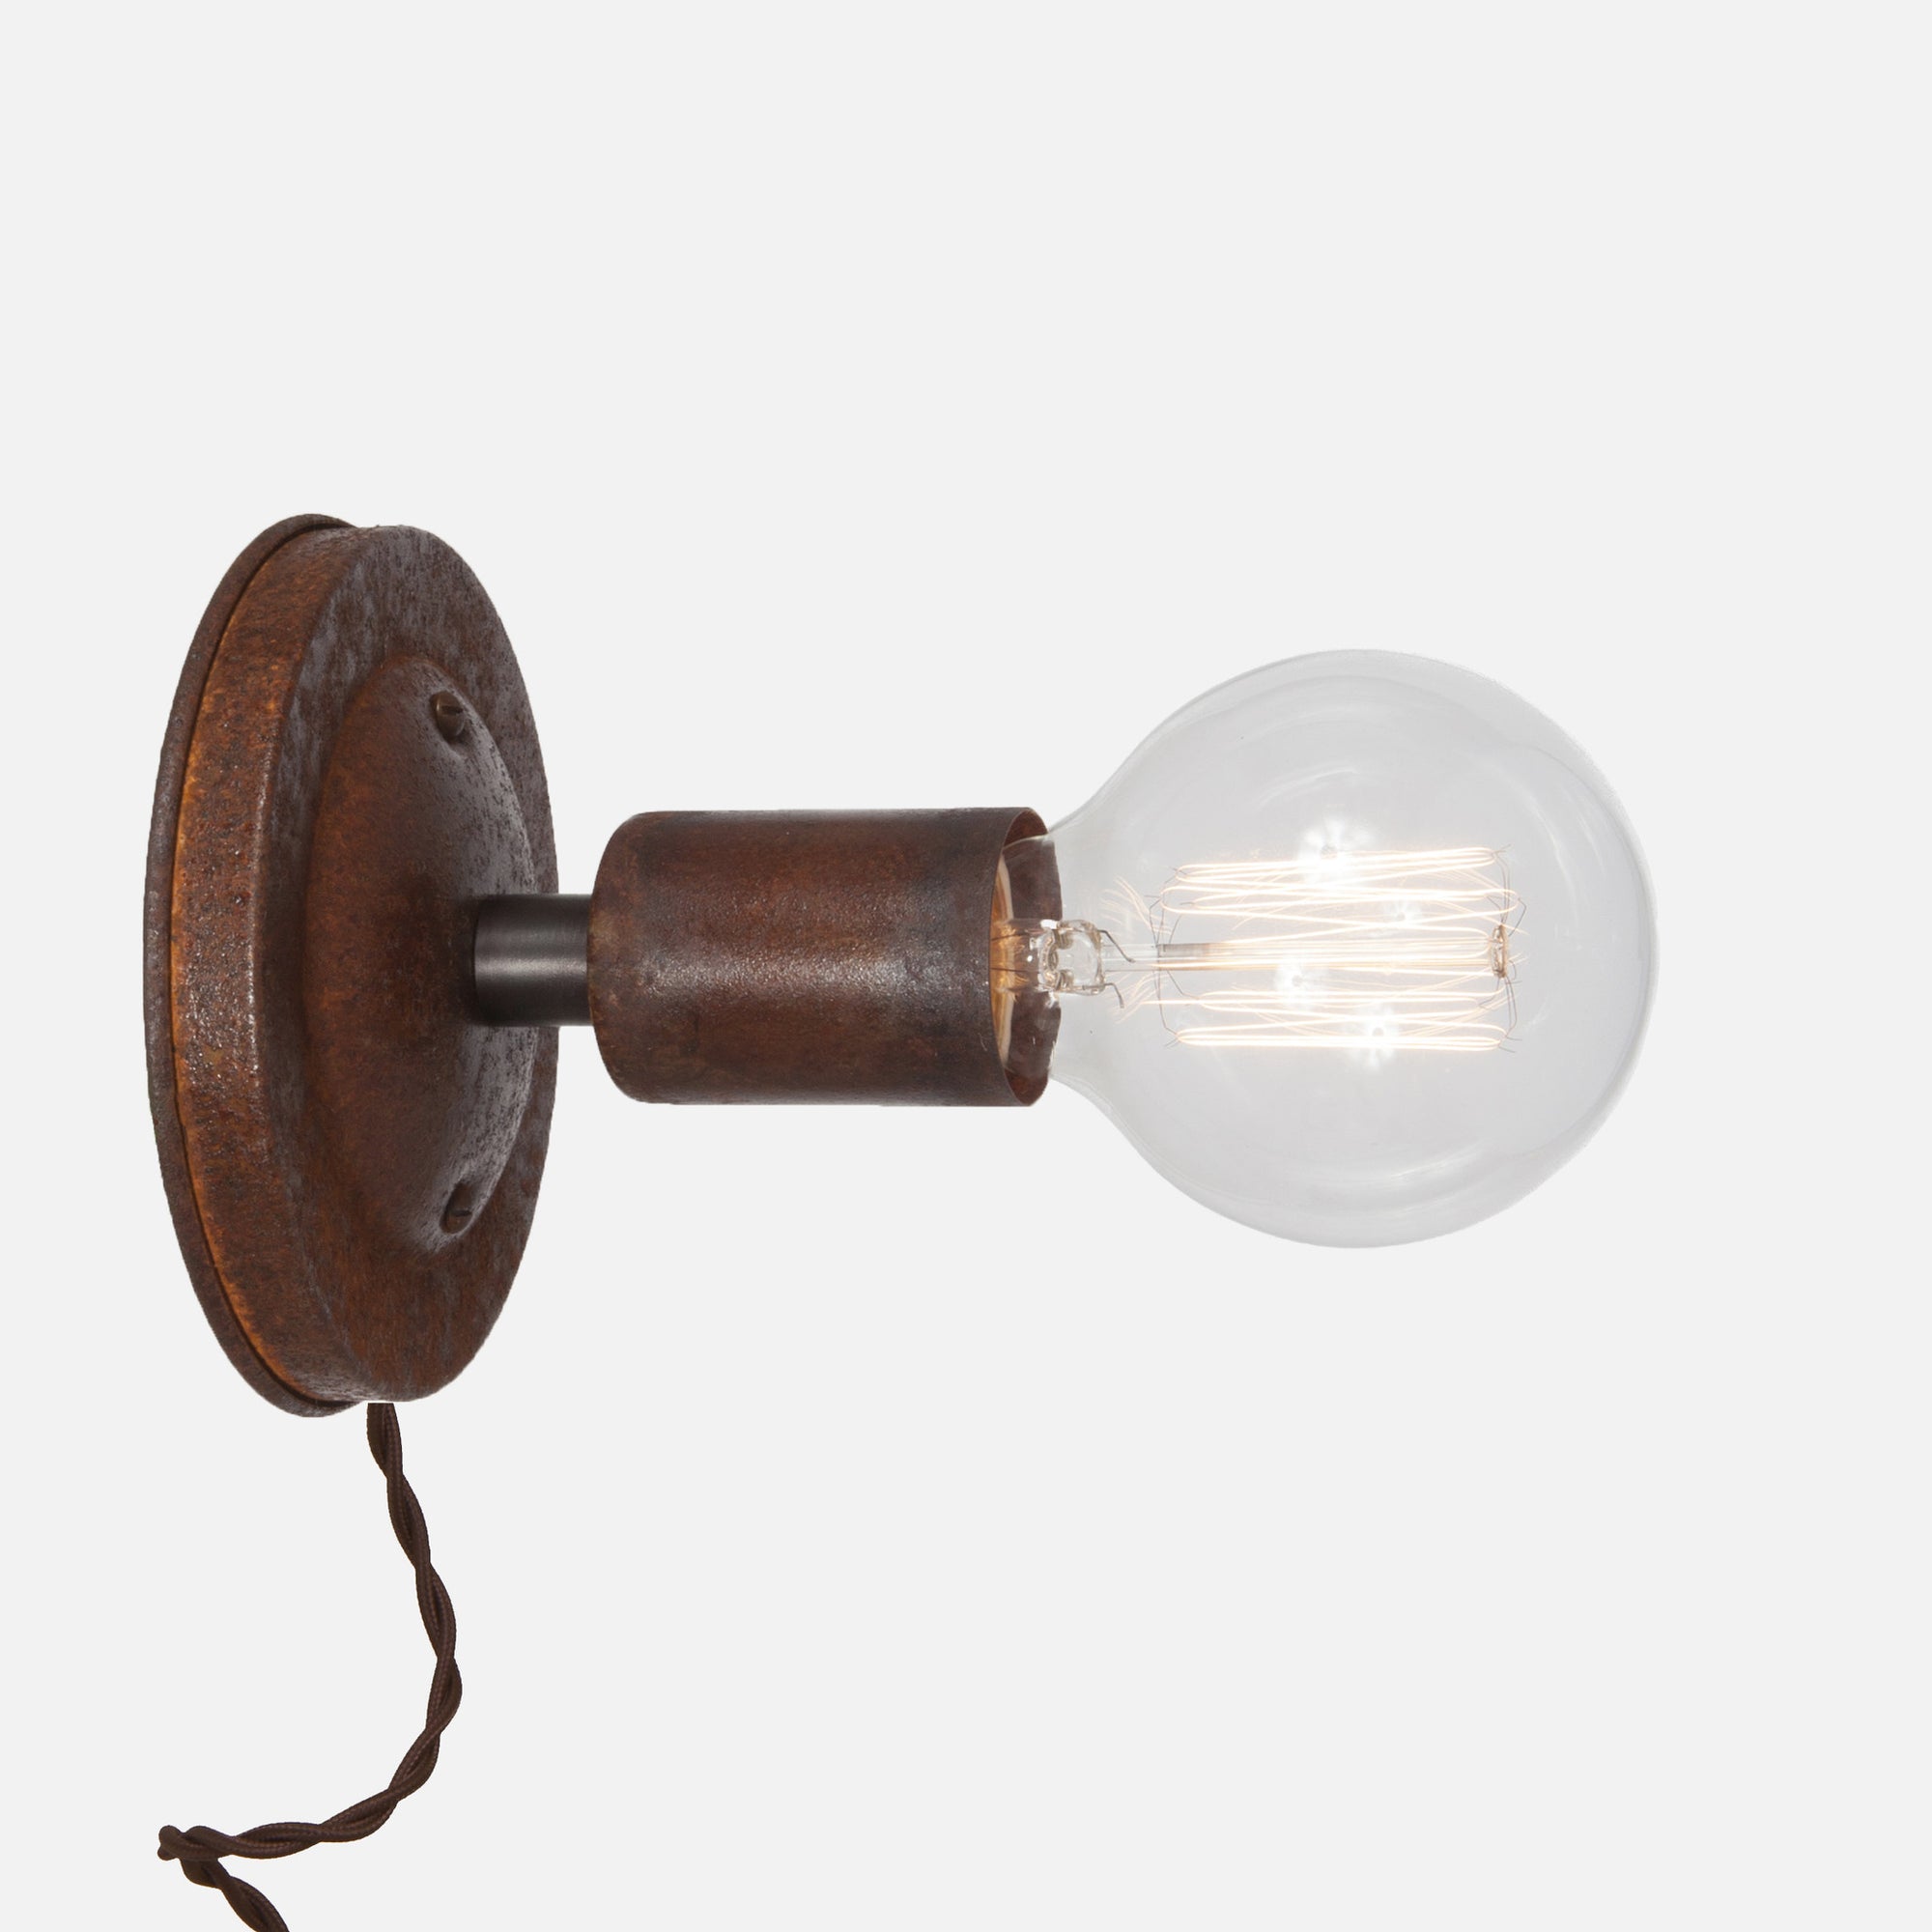 Bare Bulb Wall Sconce - Natural Rust - Plug-In